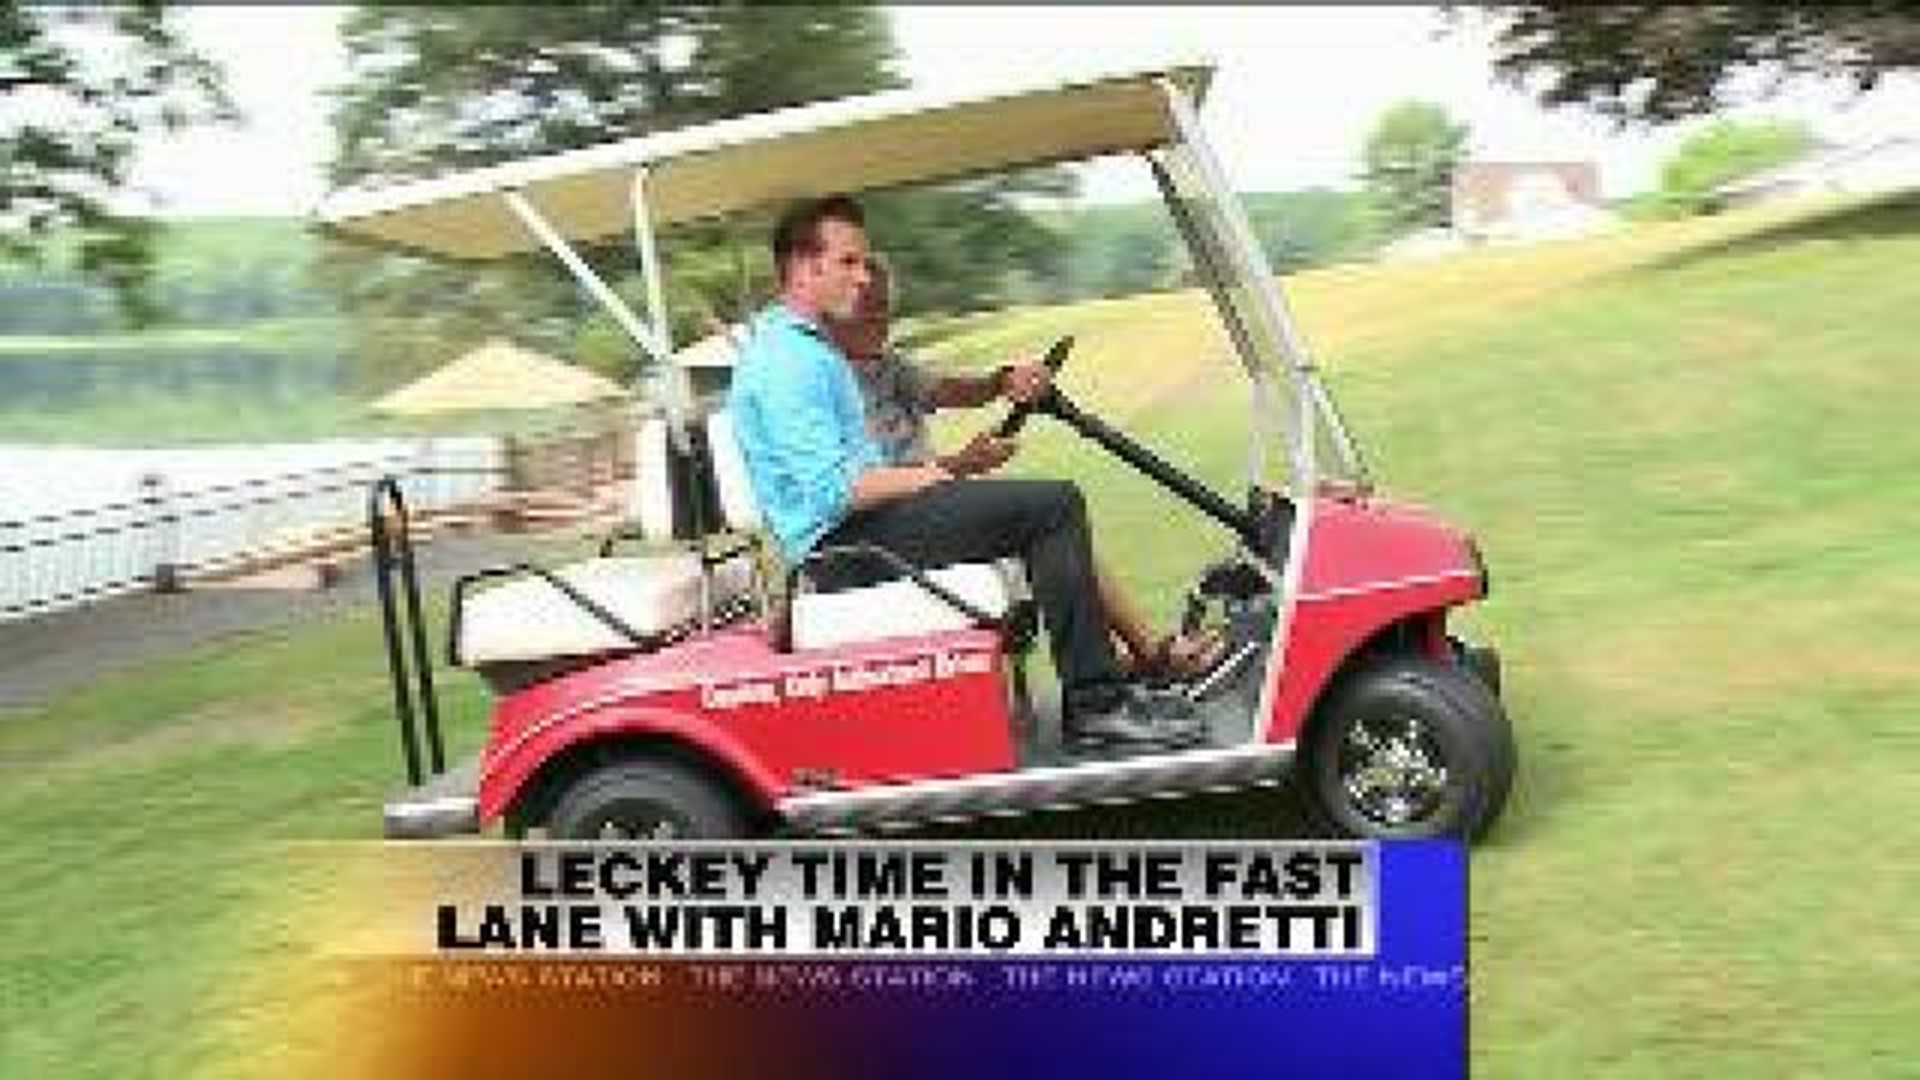 Leckey Time: In The Fast Lane With Mario Andretti